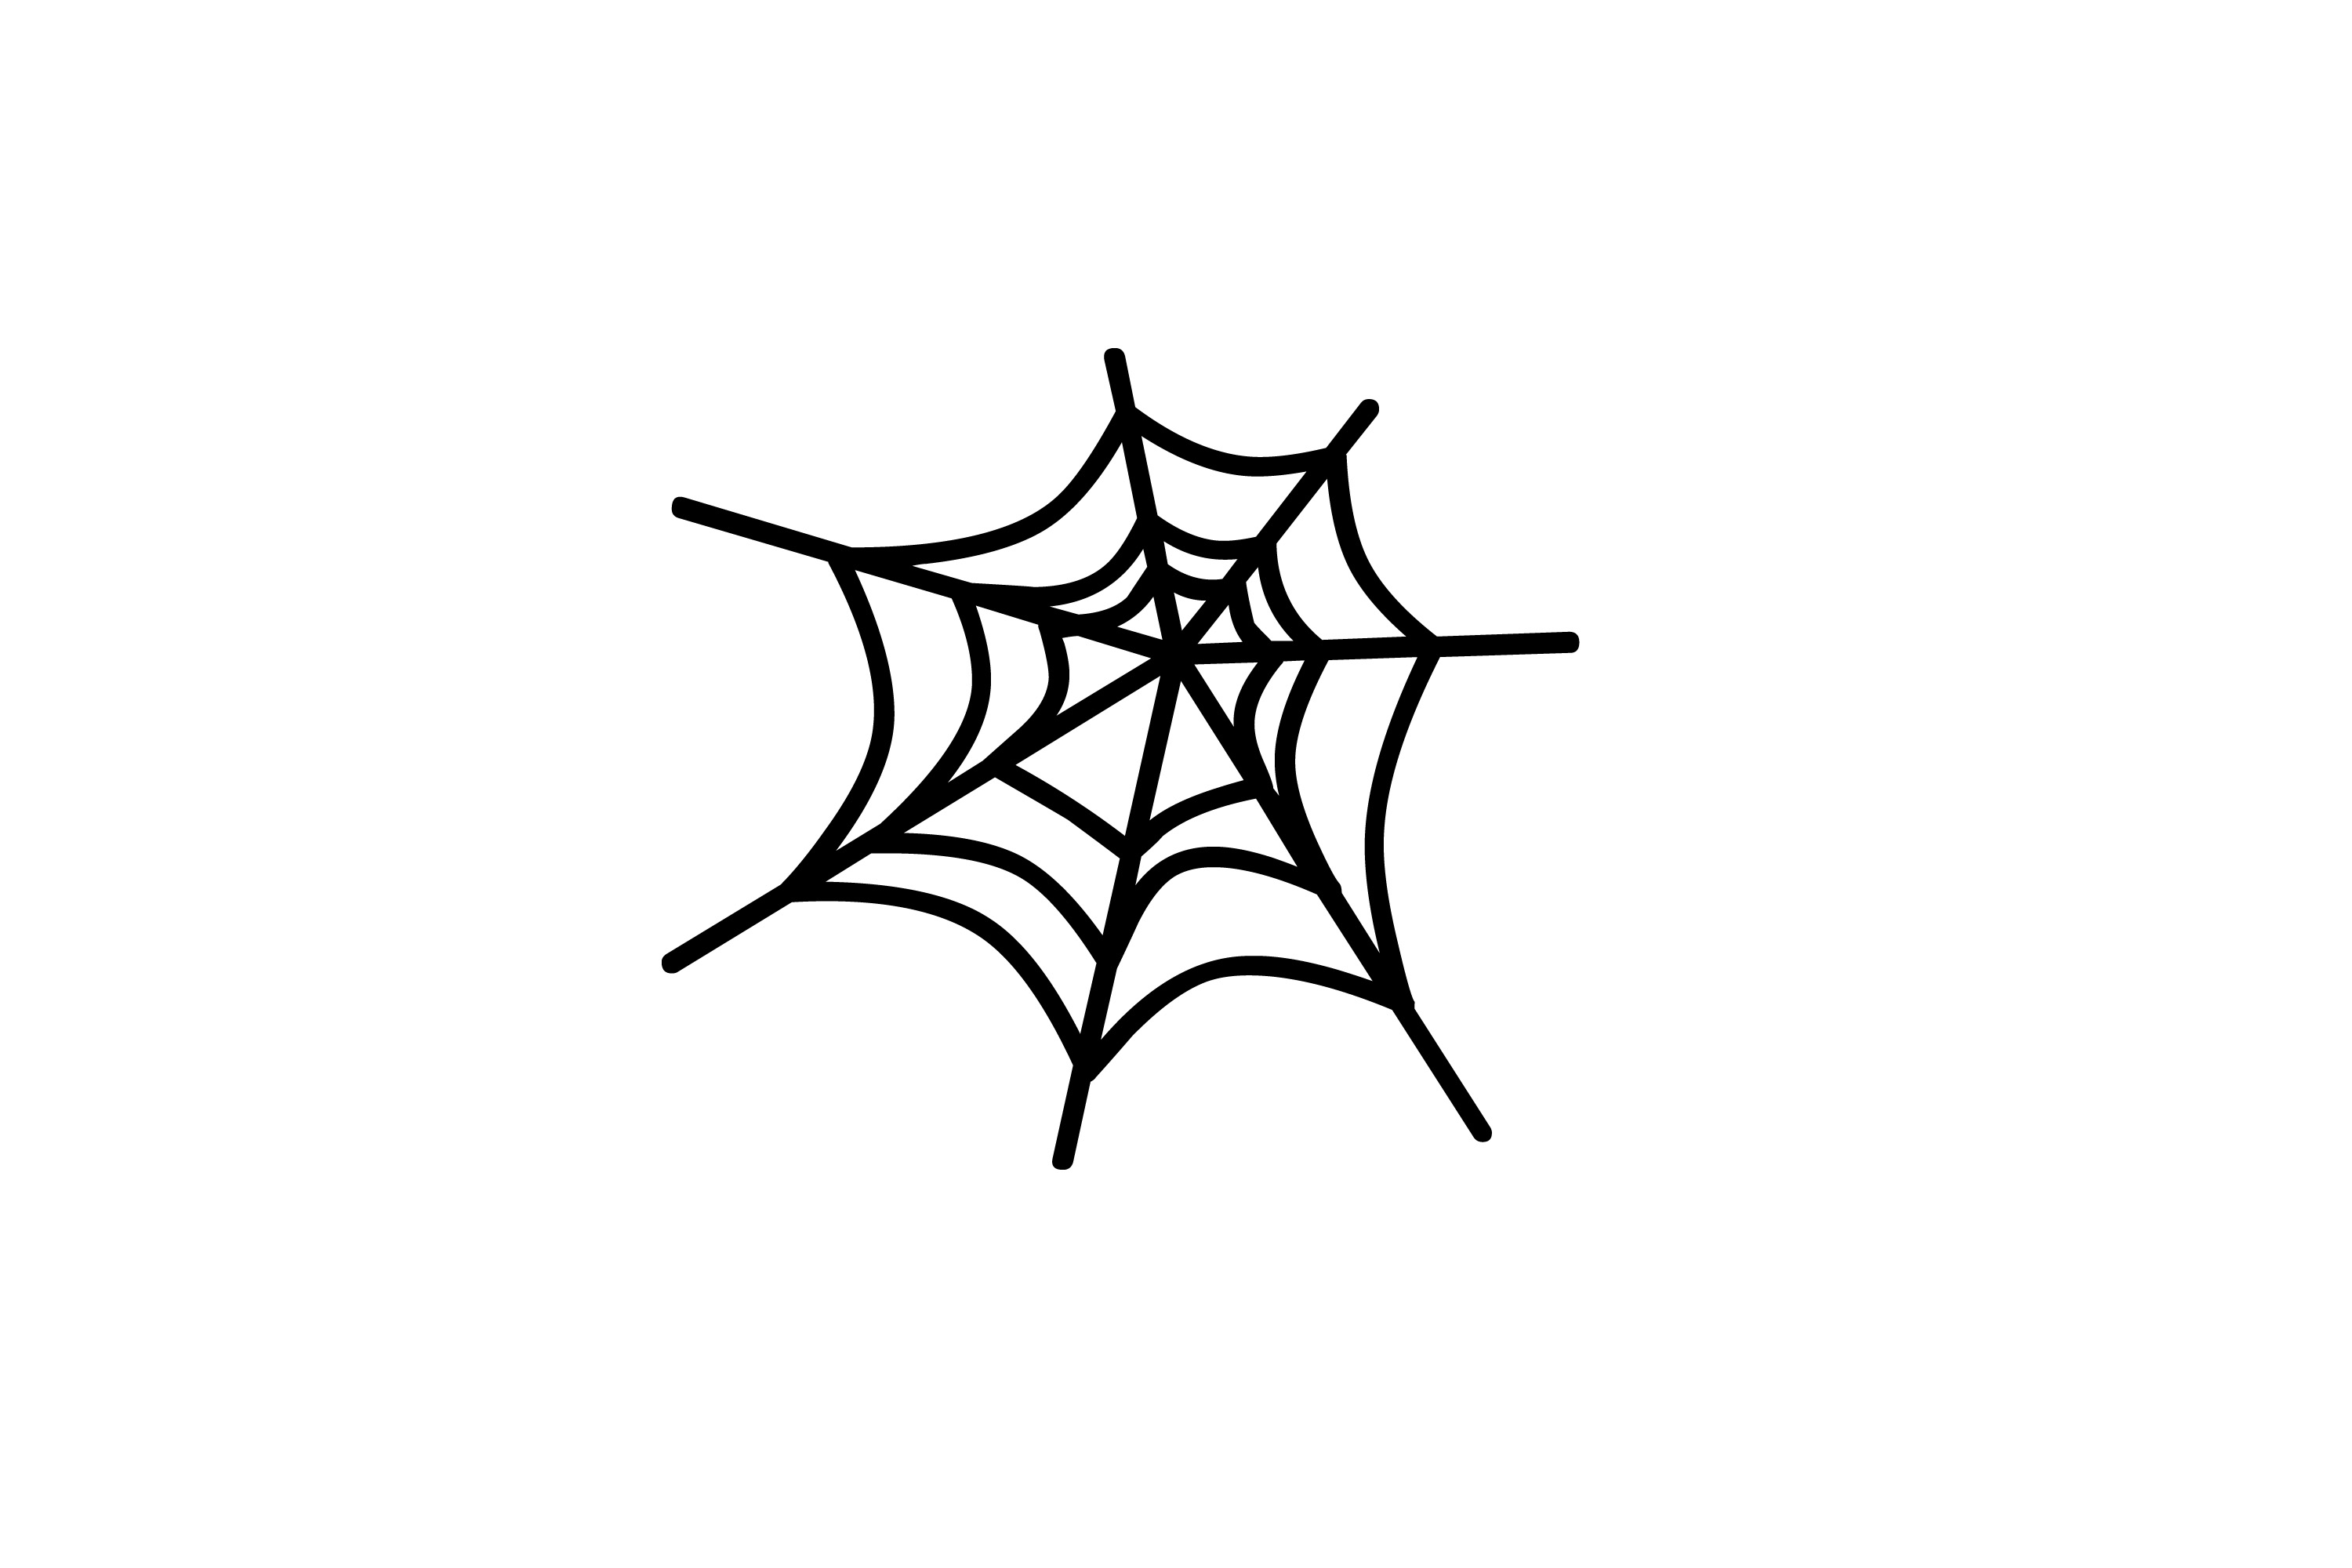 Spider web border clipart free clipart images